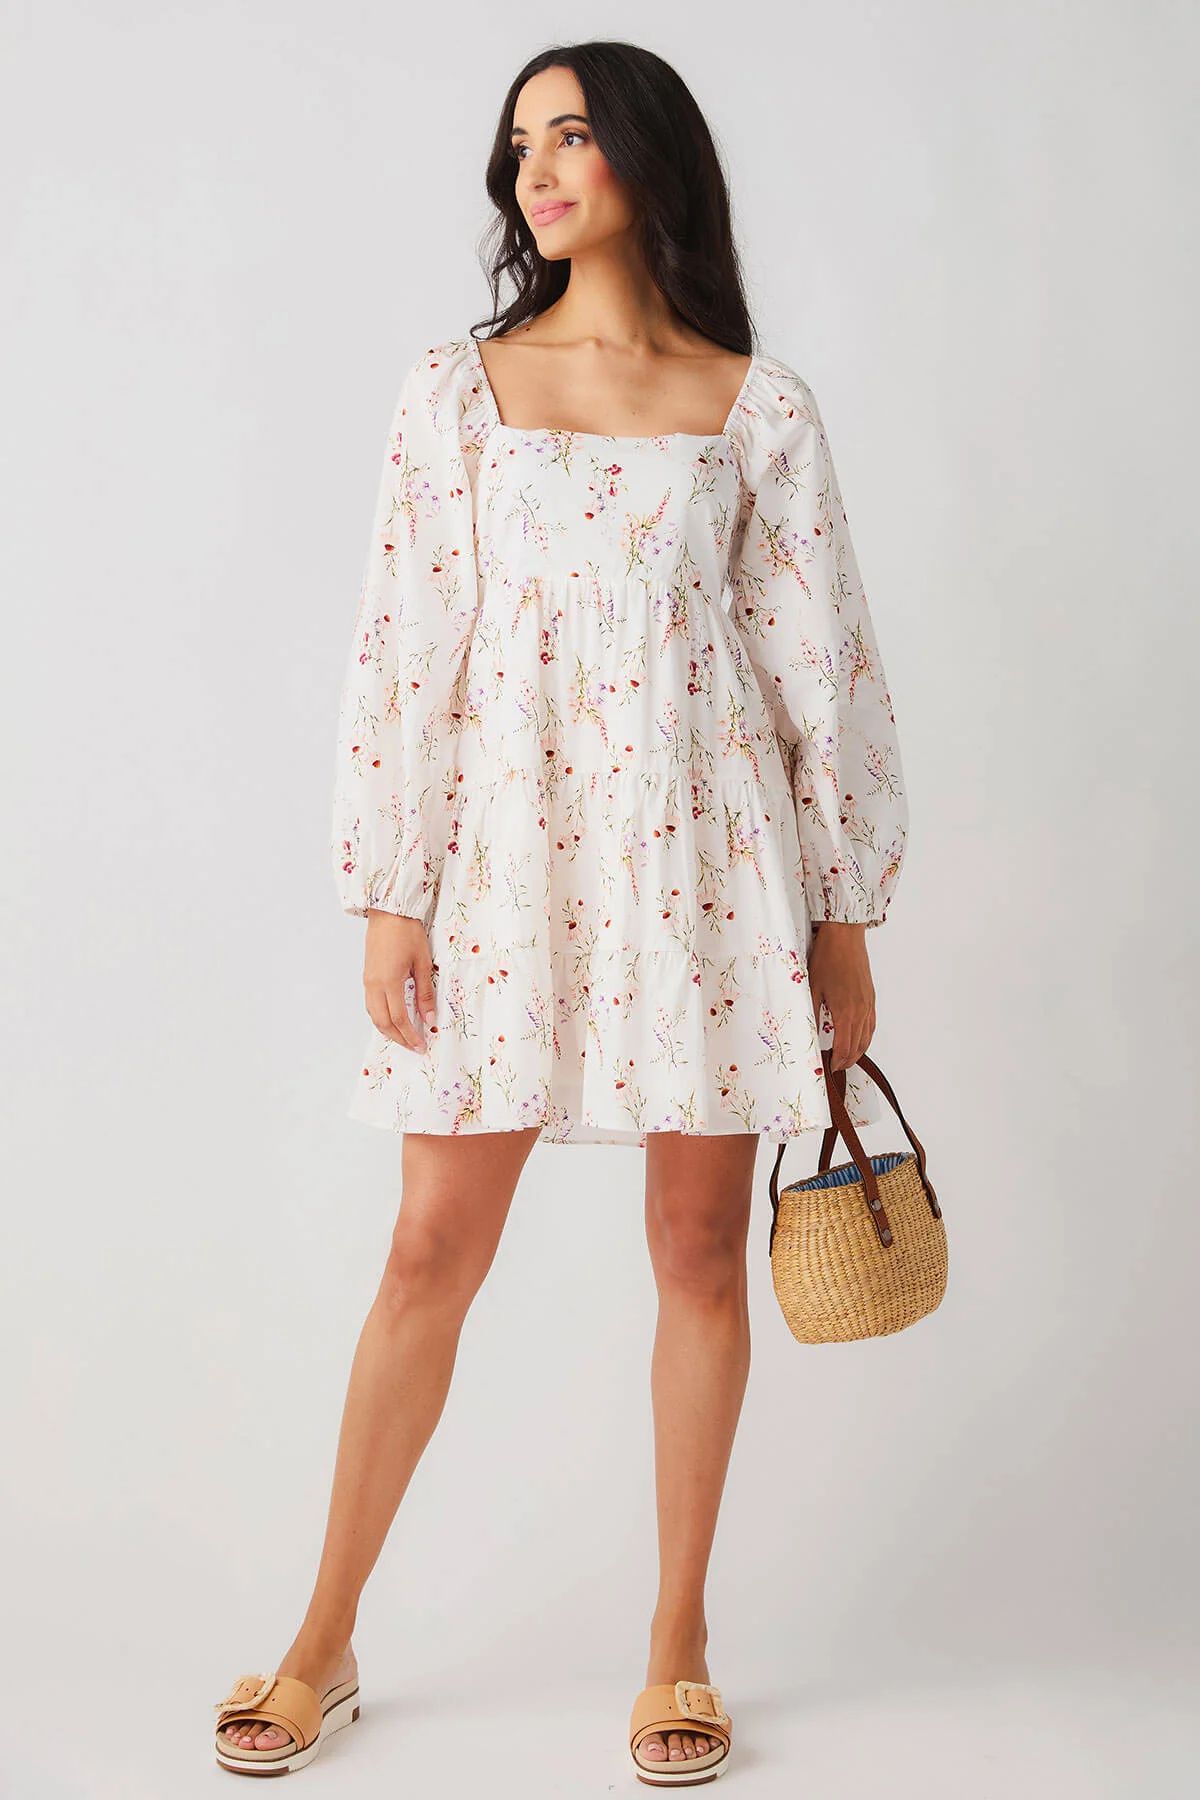 Lucy Paris Floral Tiered Dress | Social Threads